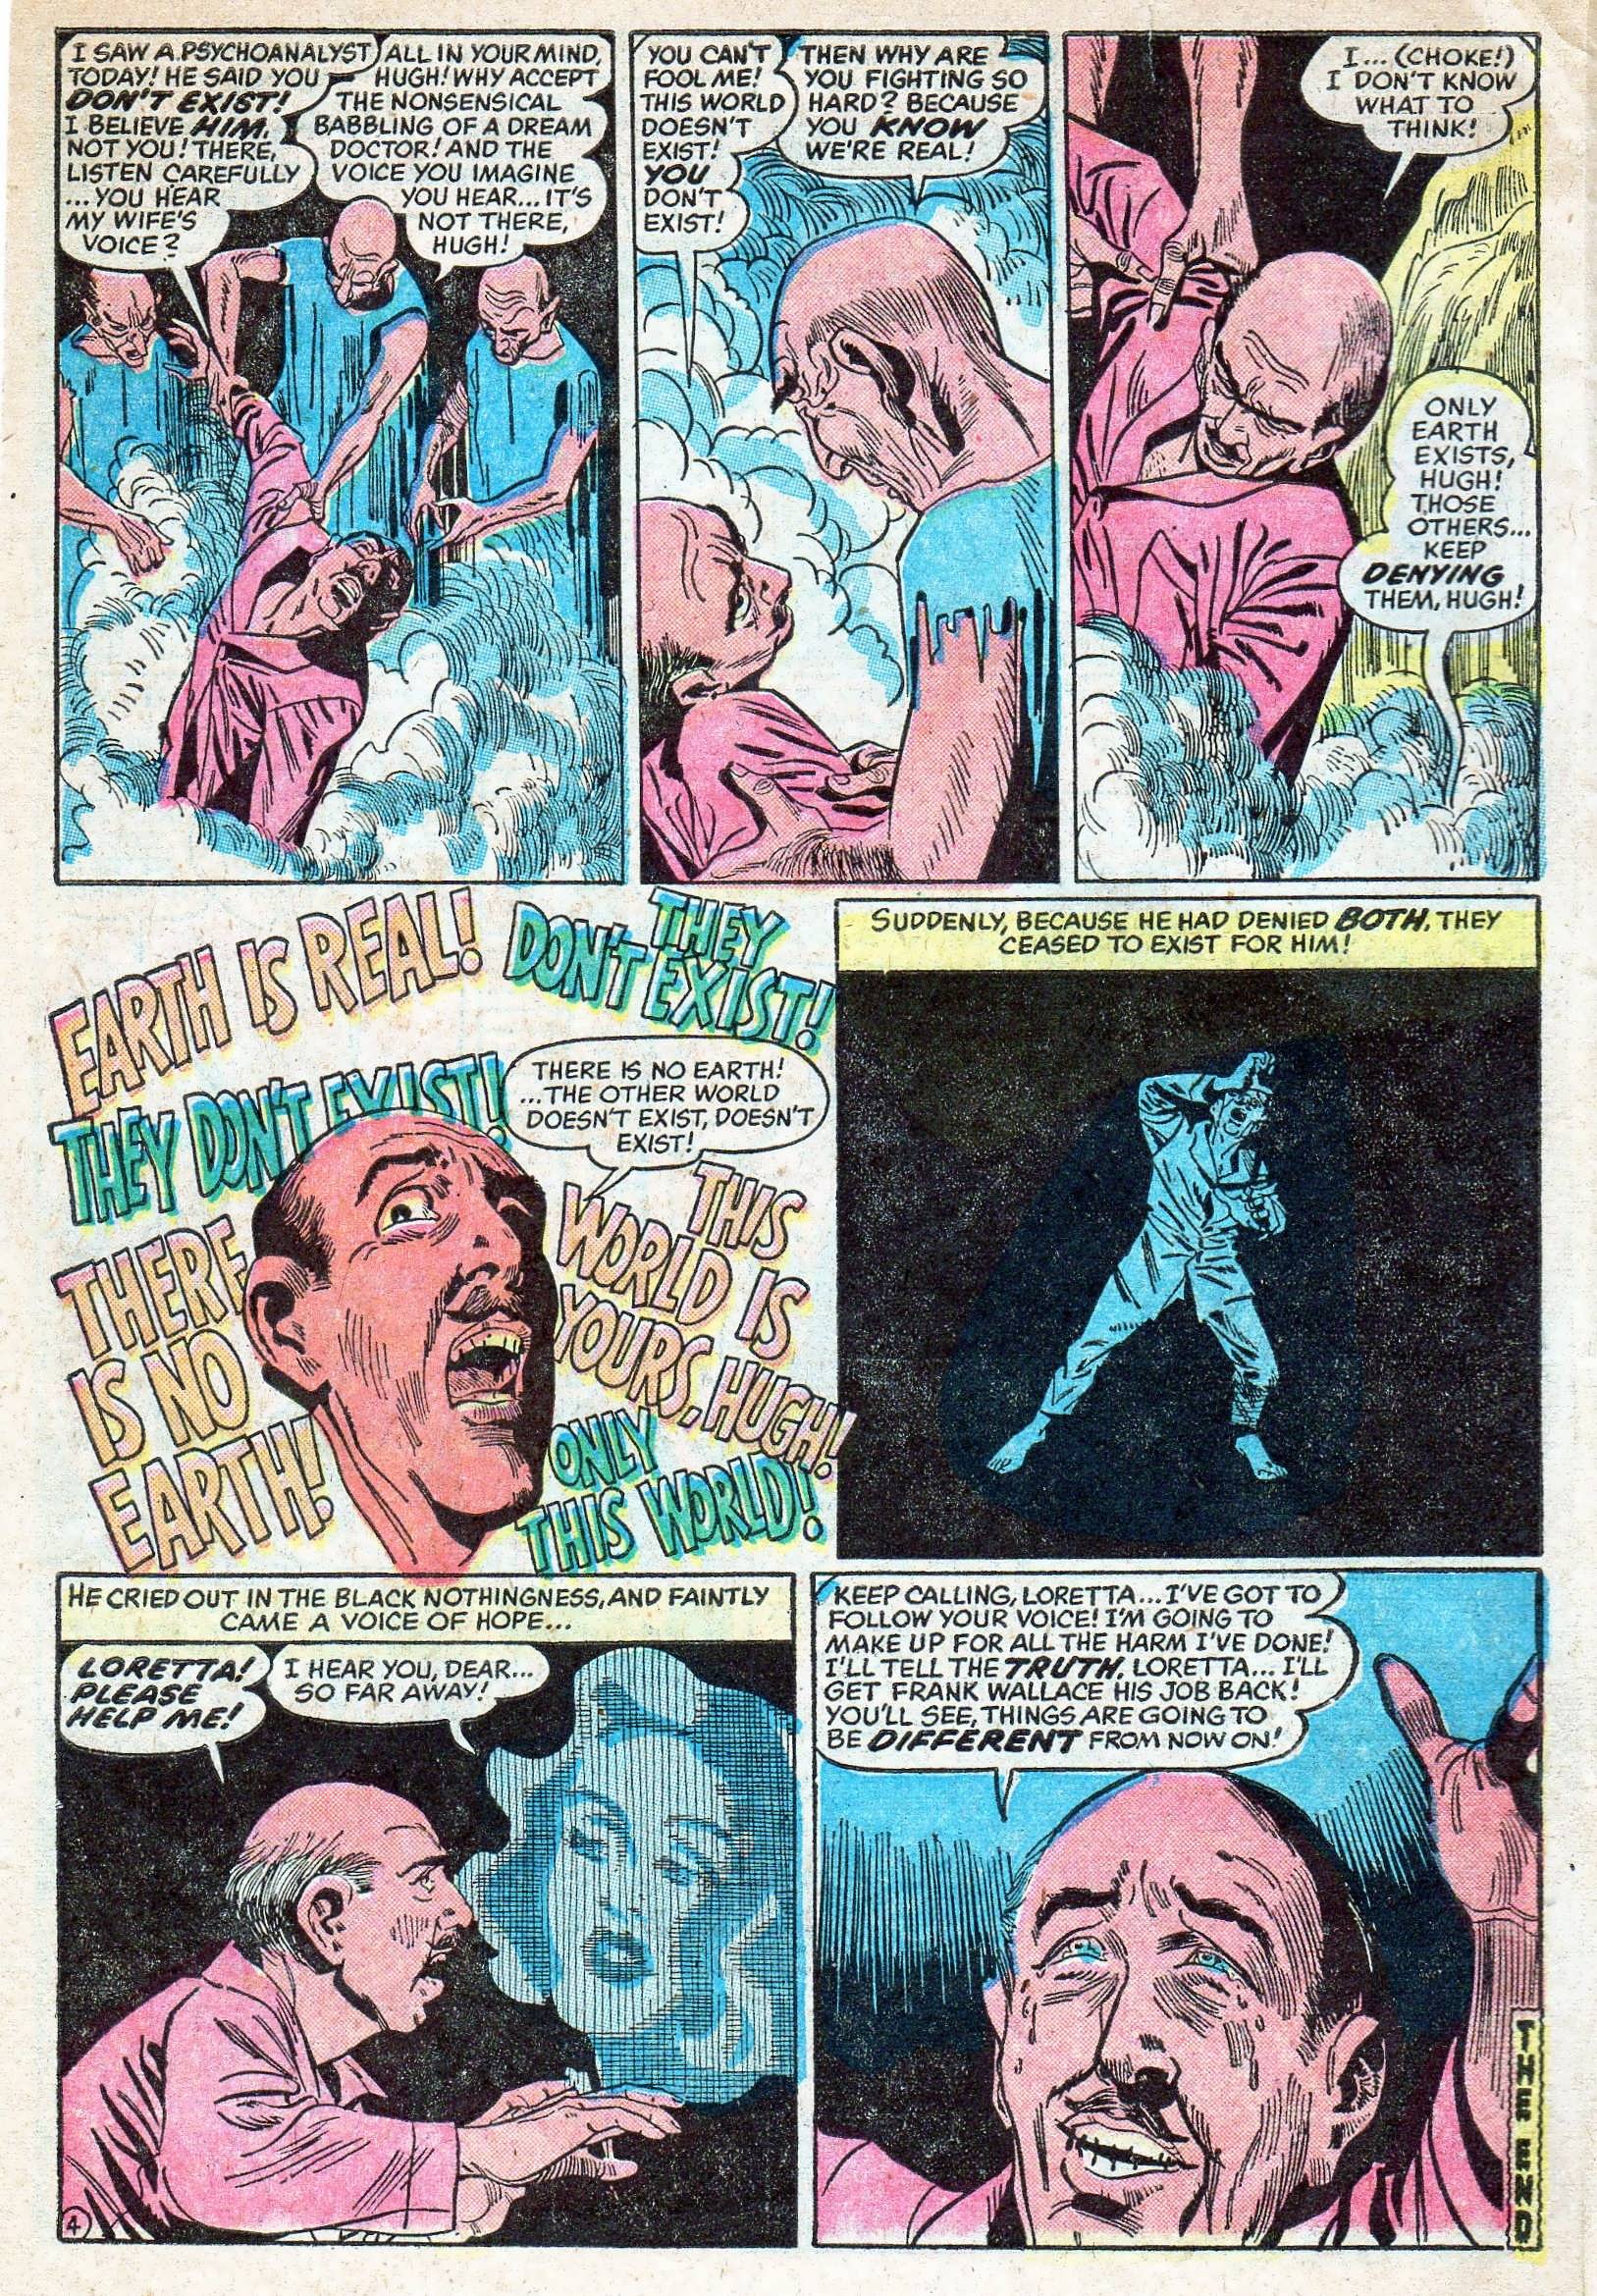 Marvel Tales (1949) 159 Page 5